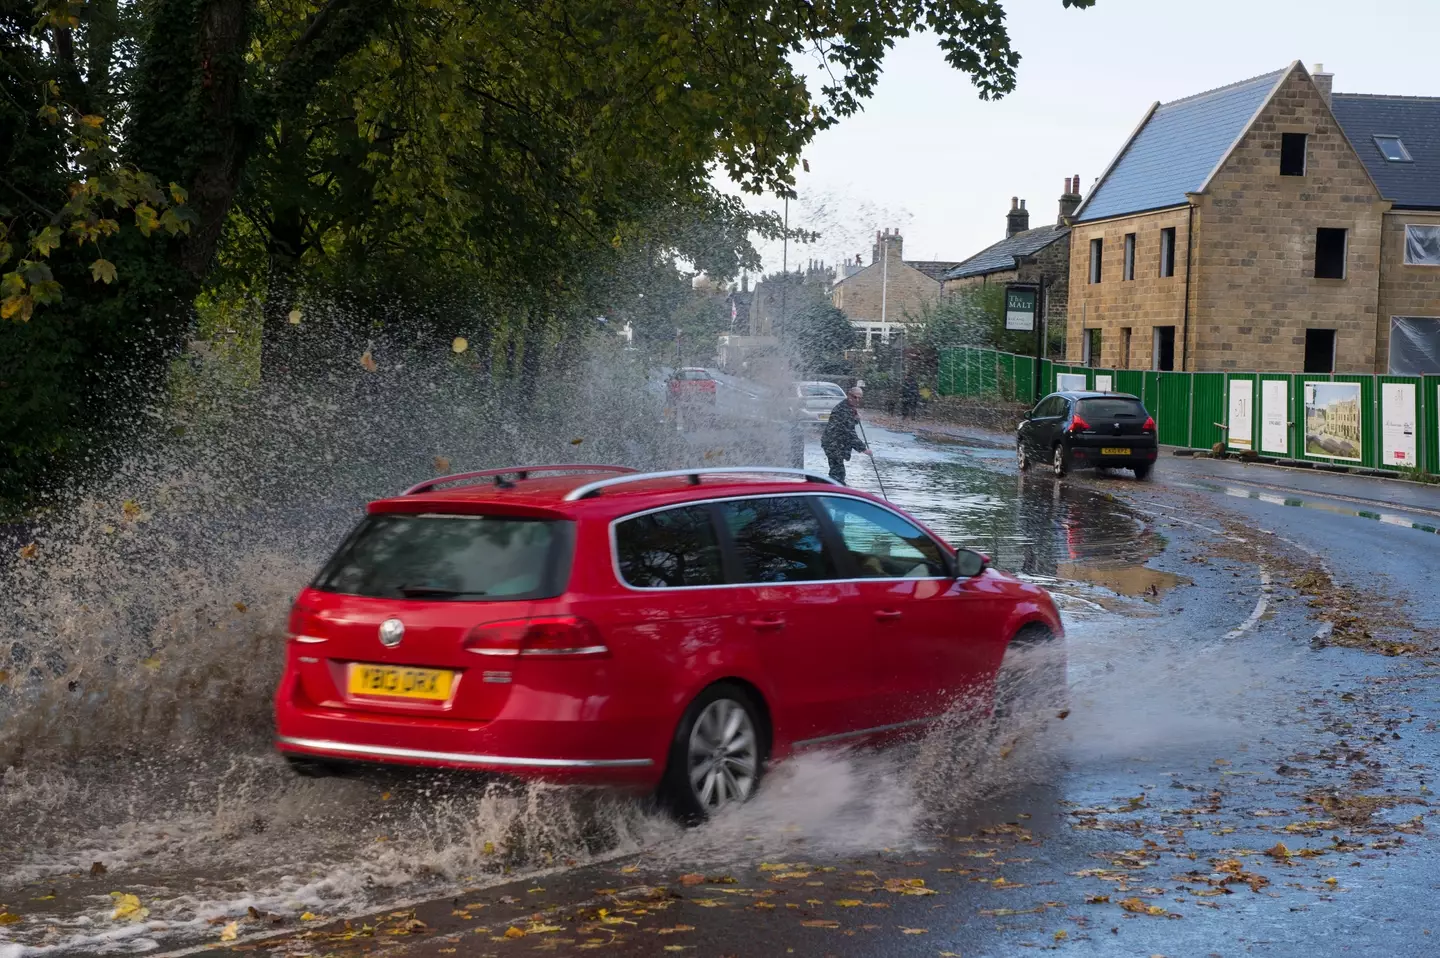 Drivers face the biggest fine for splashing a pedestrian.